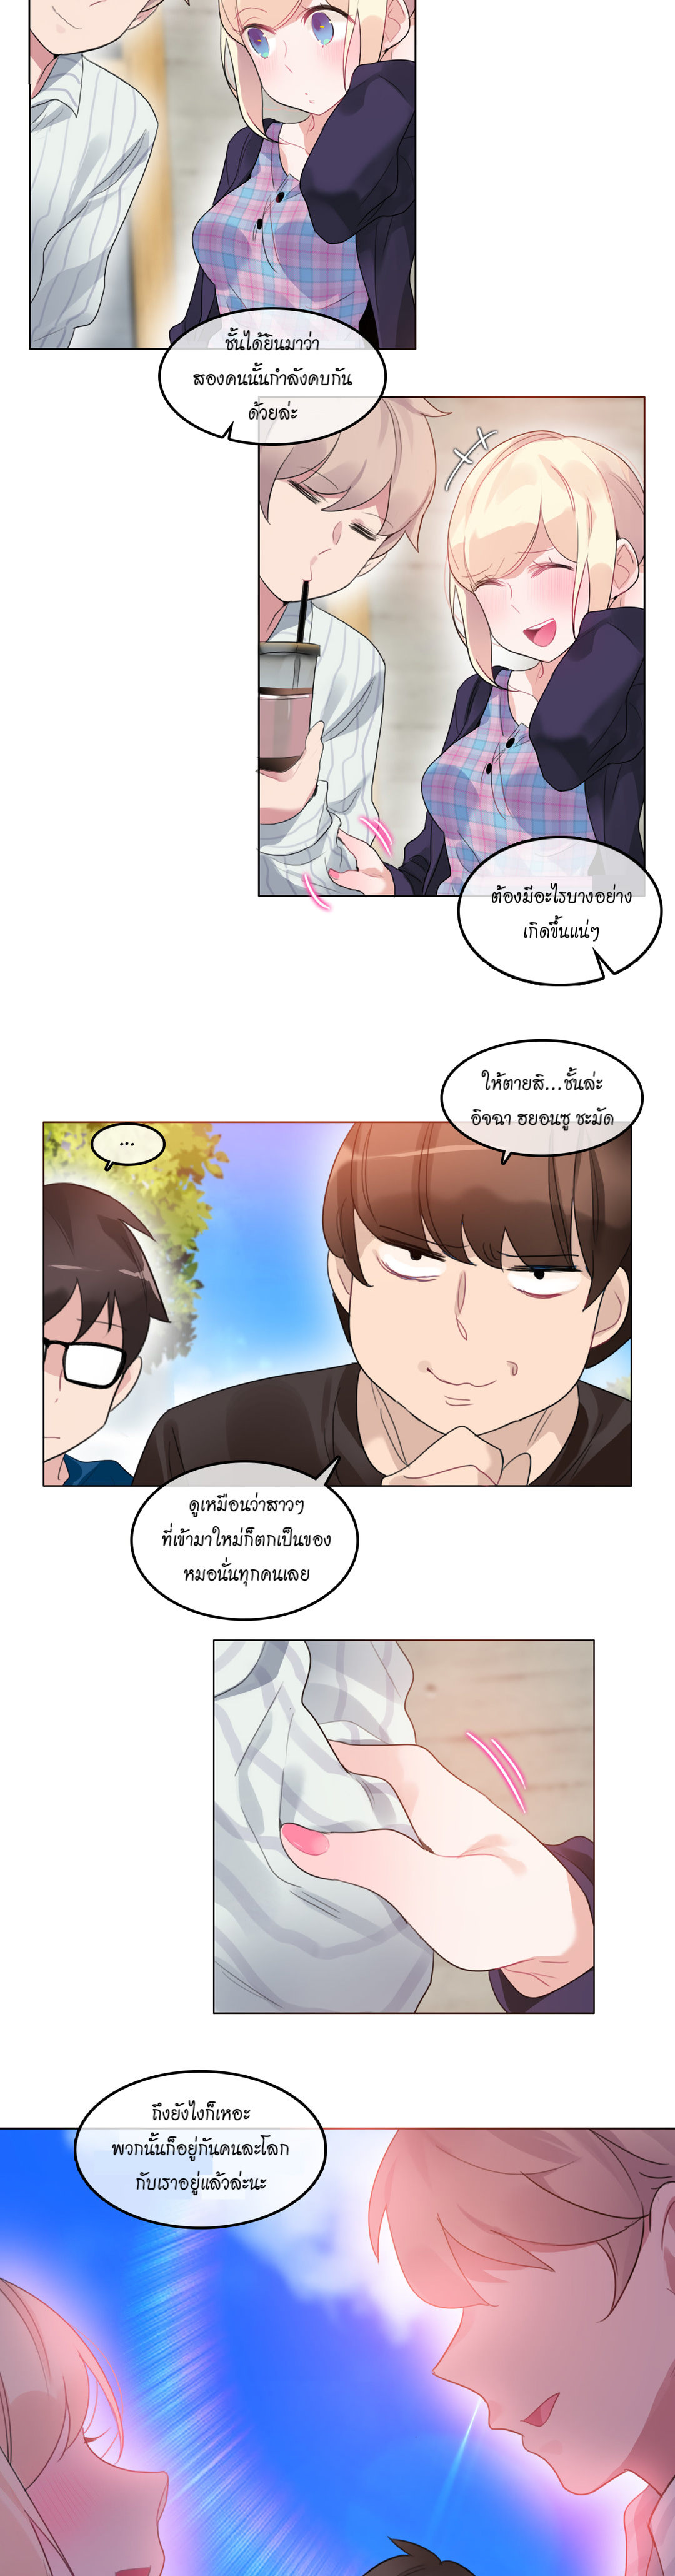 A Pervert’s Daily Life52 (8)